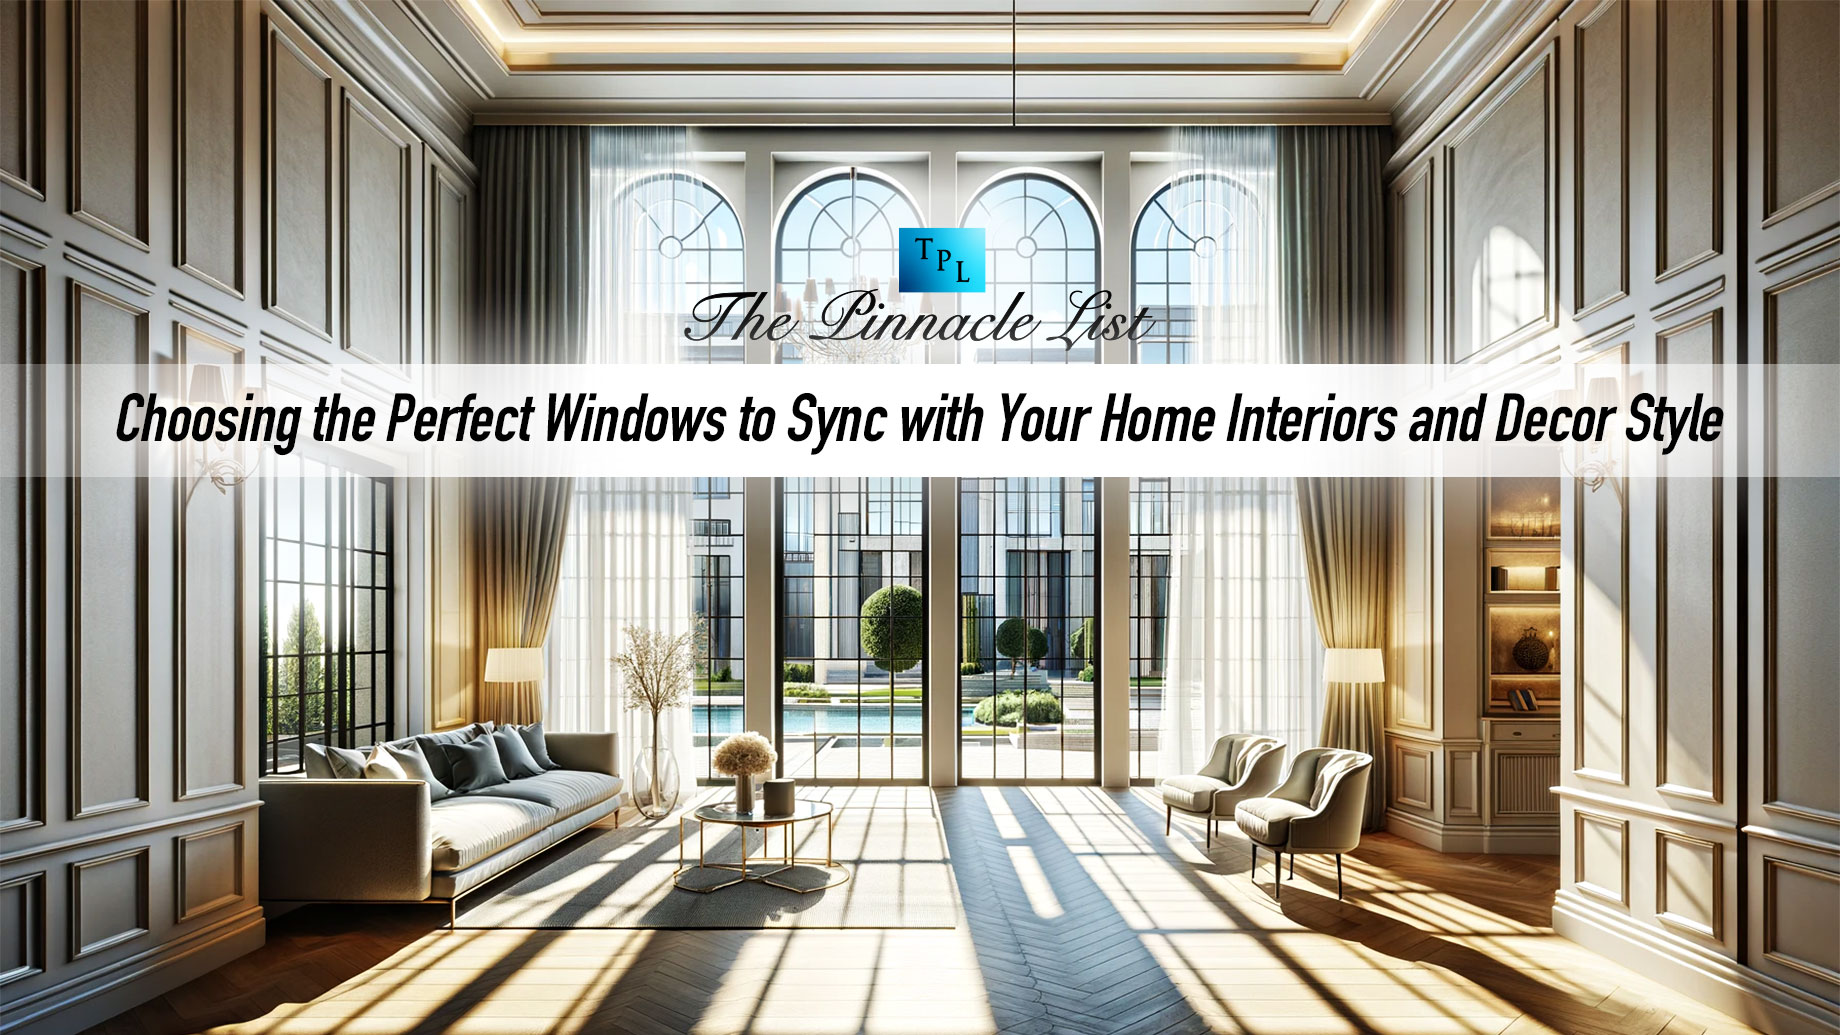 Choosing the Perfect Windows to Sync with Your Home Interiors and Decor Style